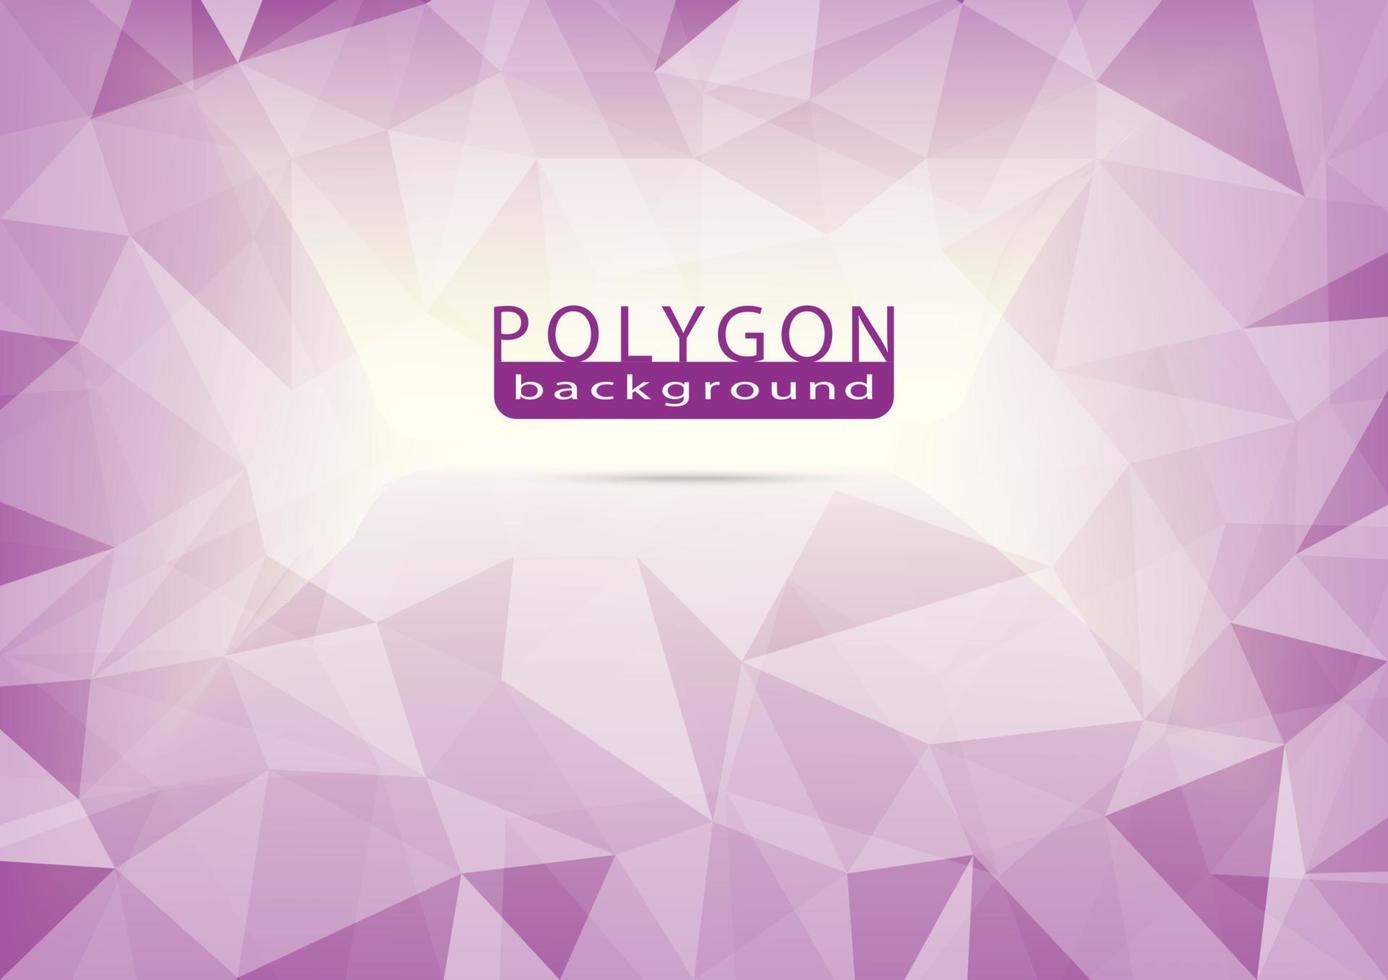 Abstract background. Polygonal on a mesh background. vector illustration.